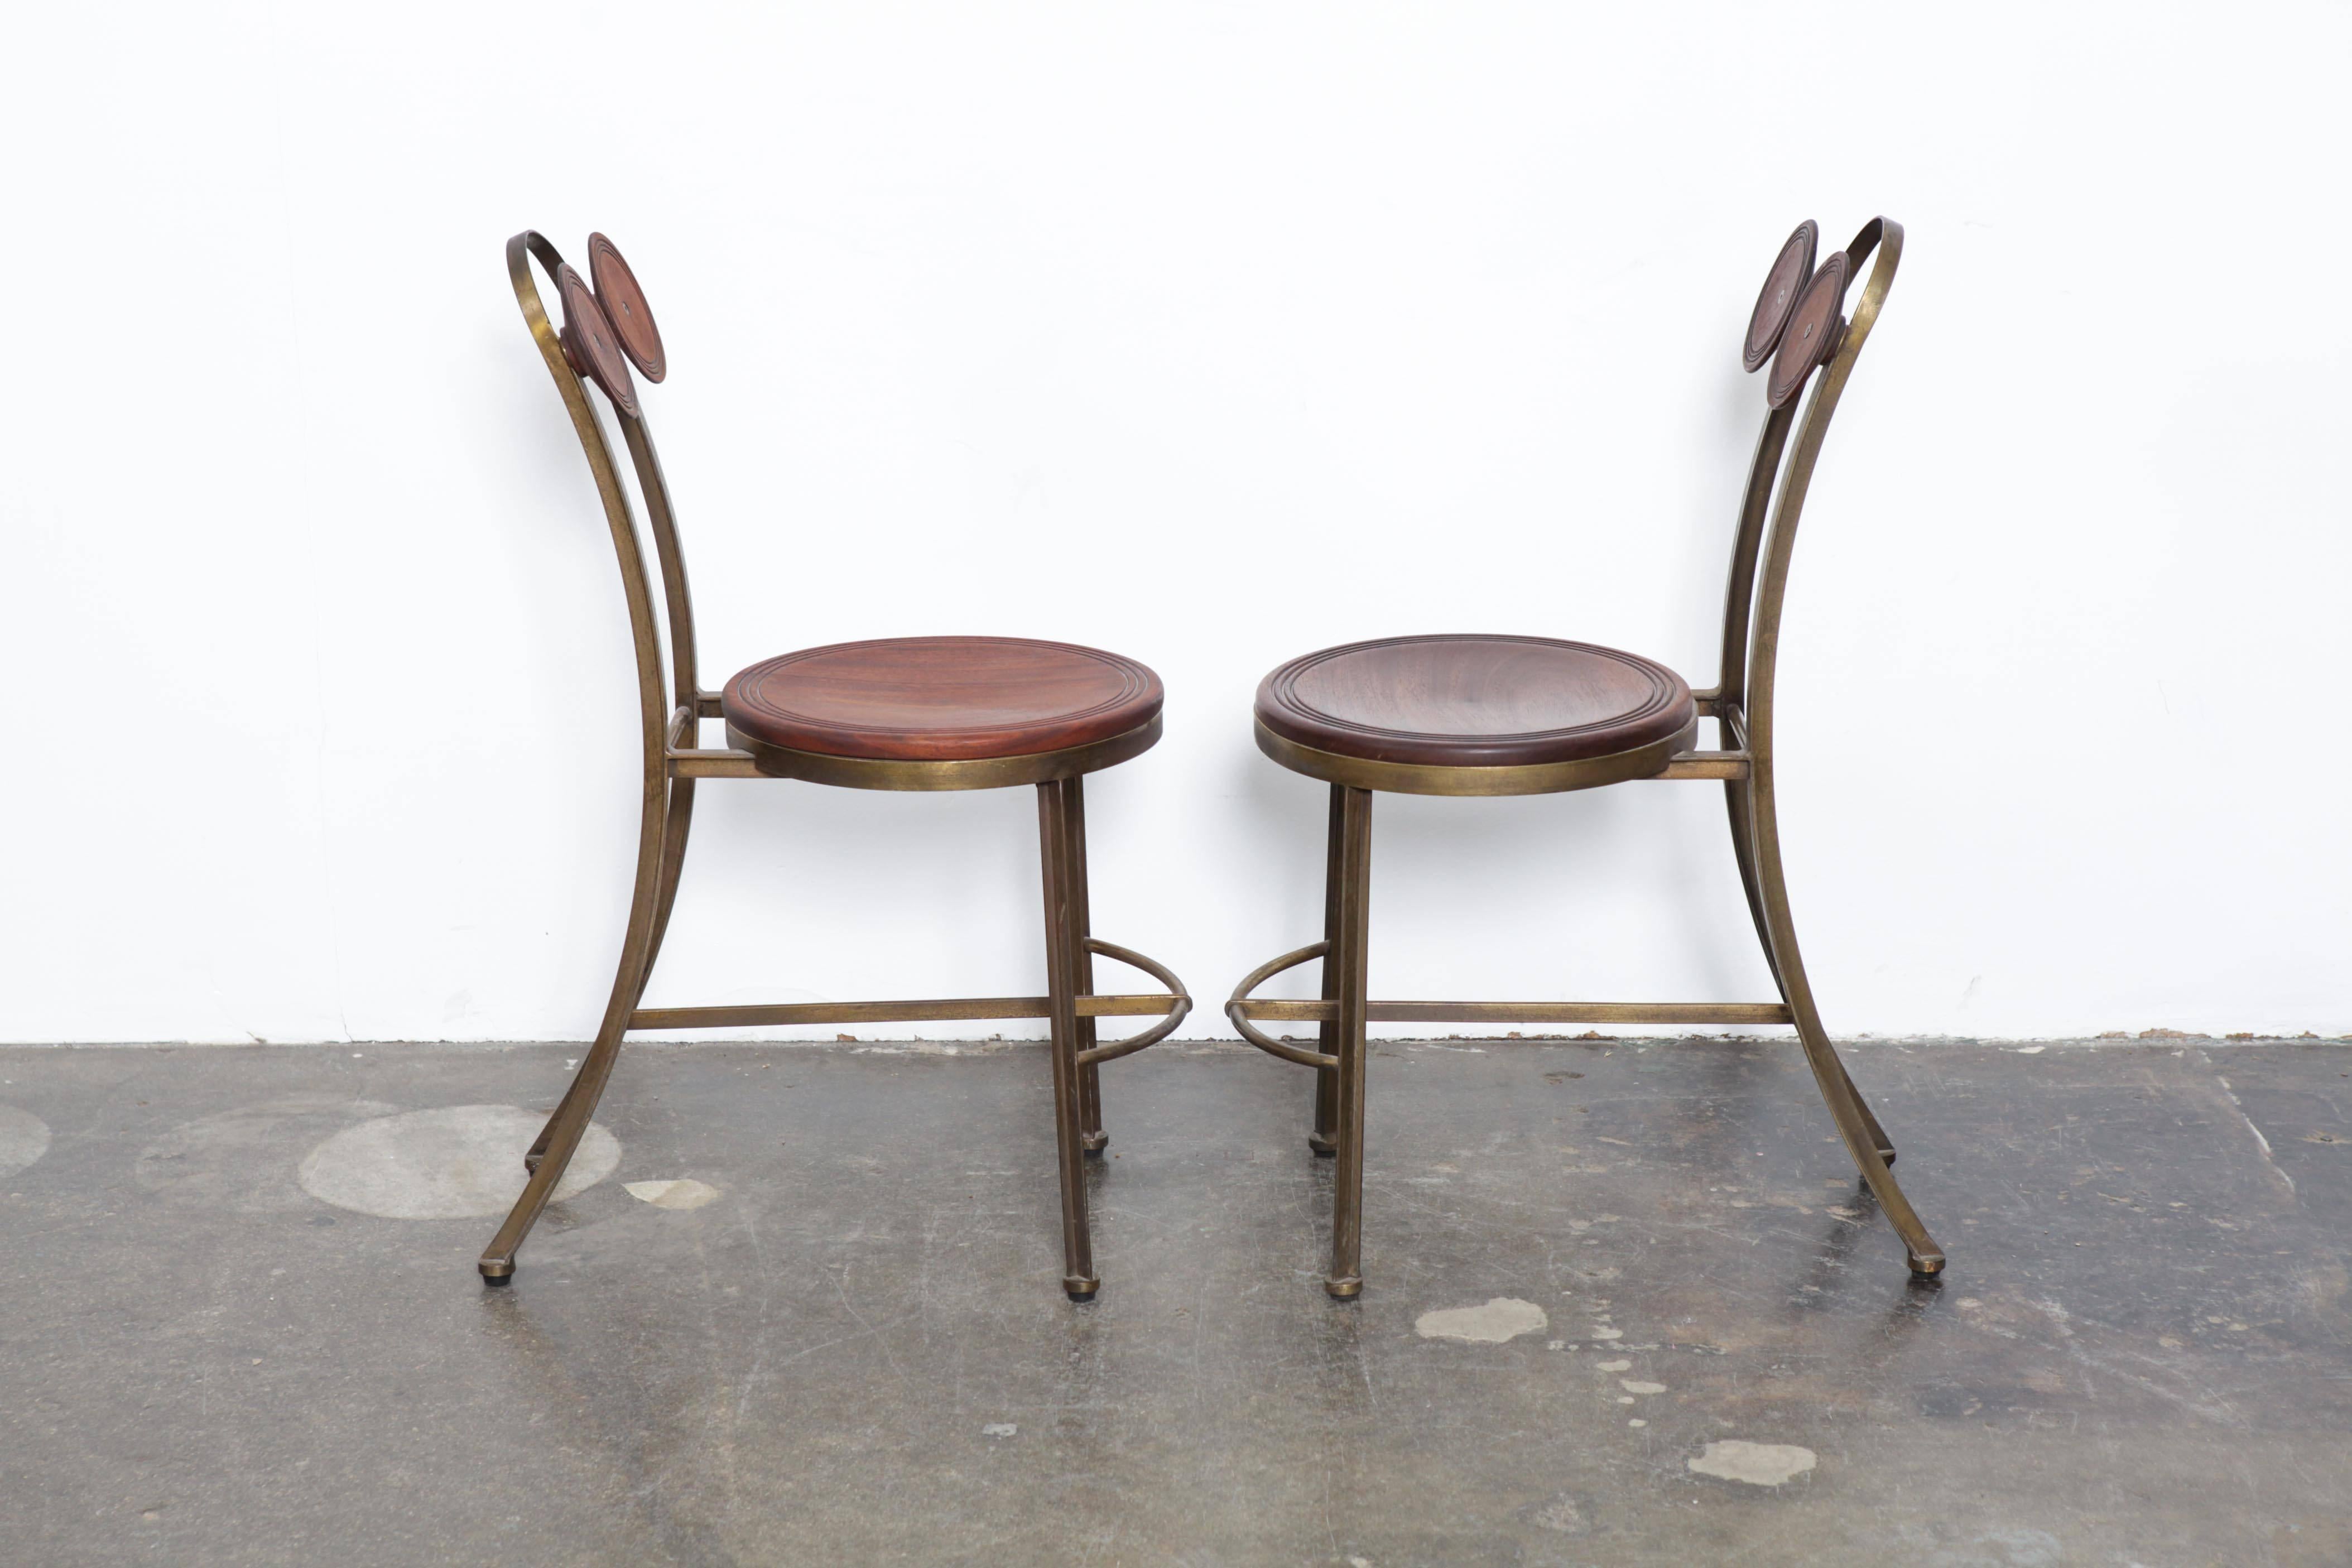 Brazilian Pair of Bronze and Freijo Wood Chair by Pedro Useche